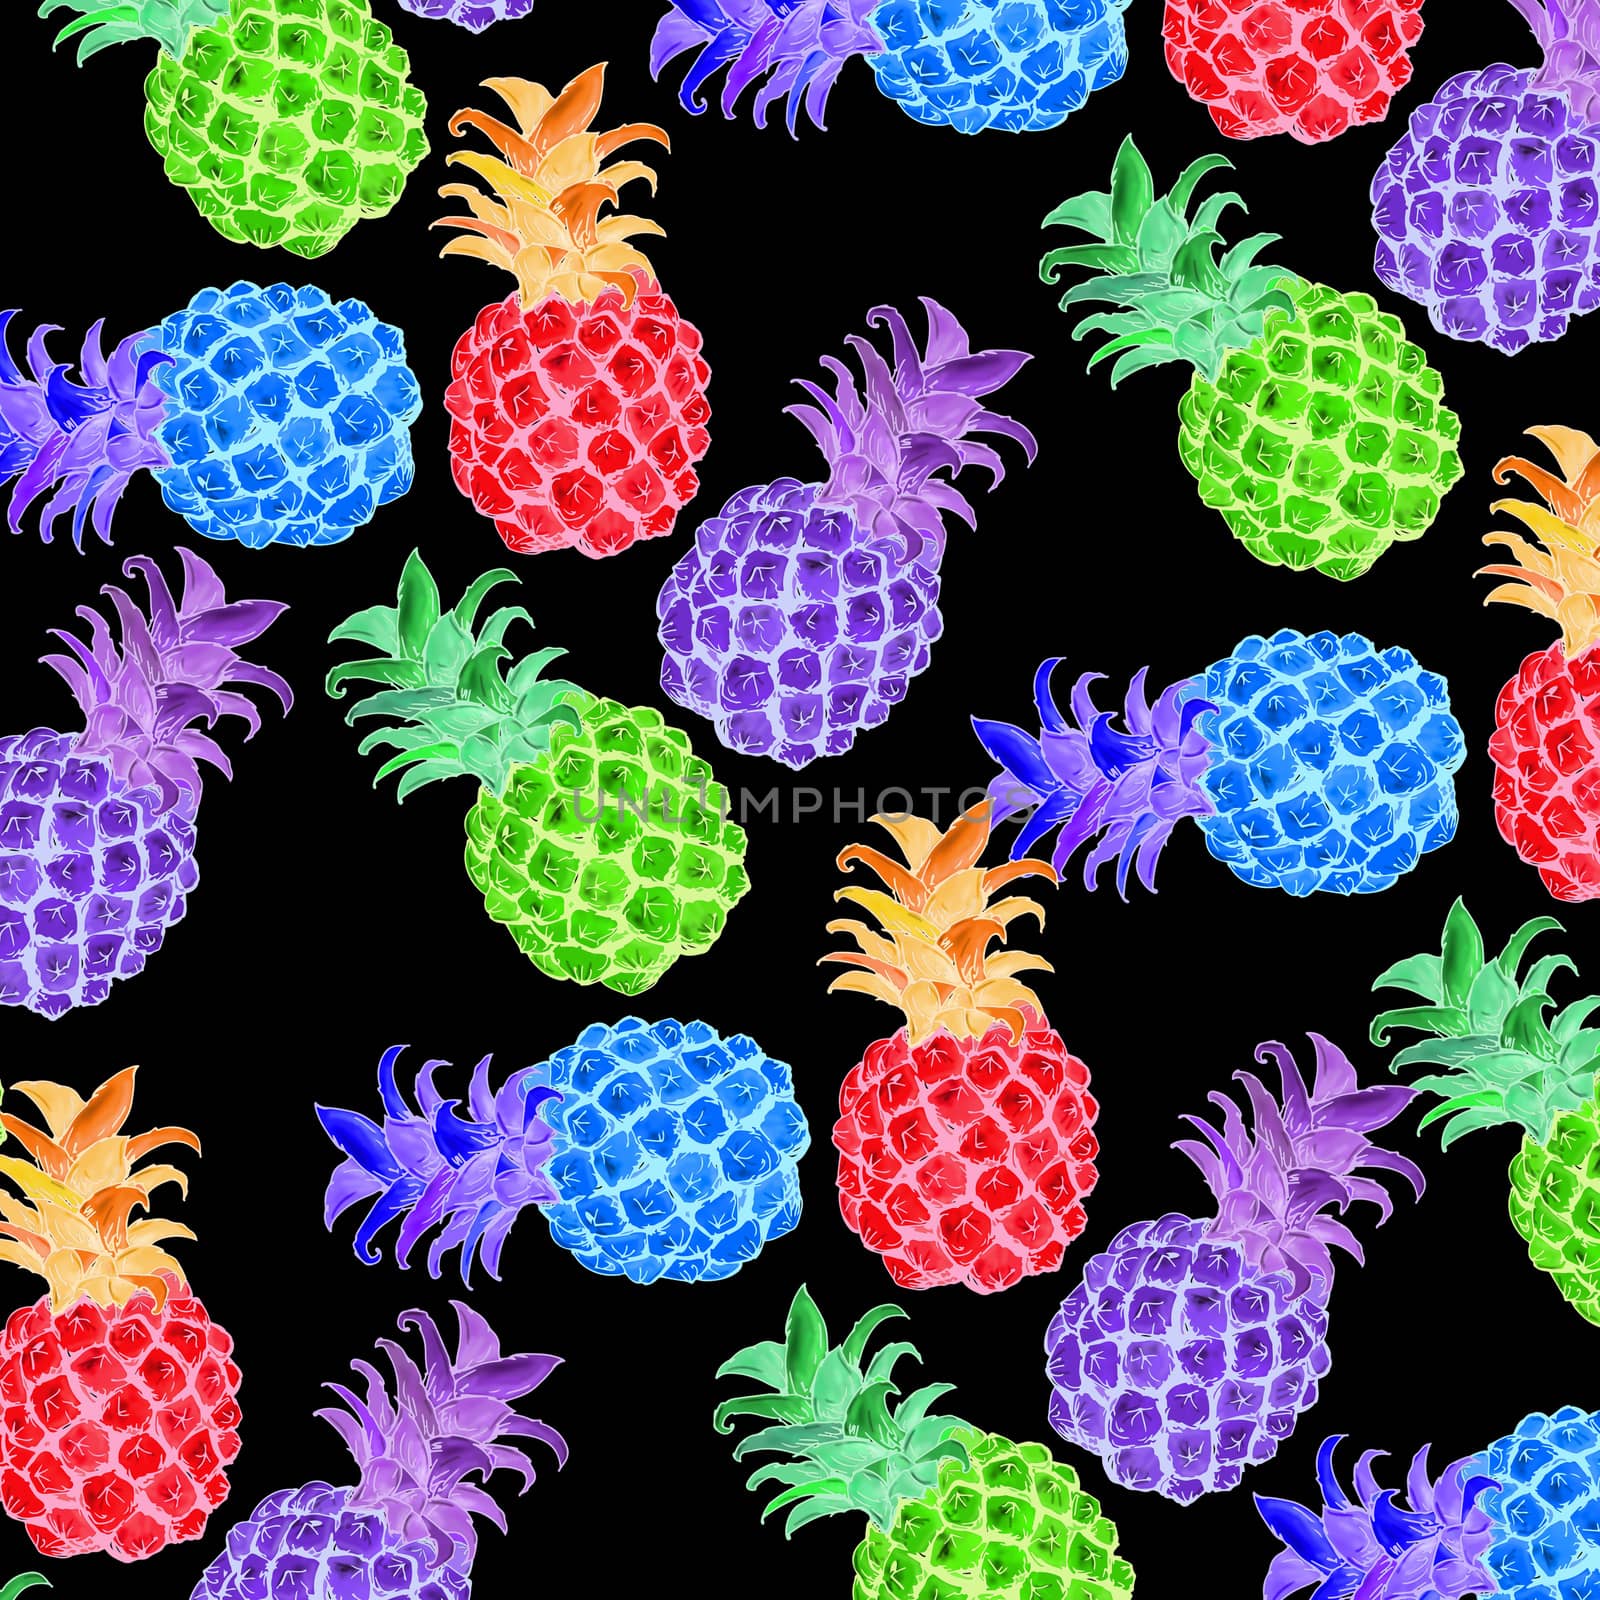 fabrics with color drawn pineapple with black background by silviagaudenzi